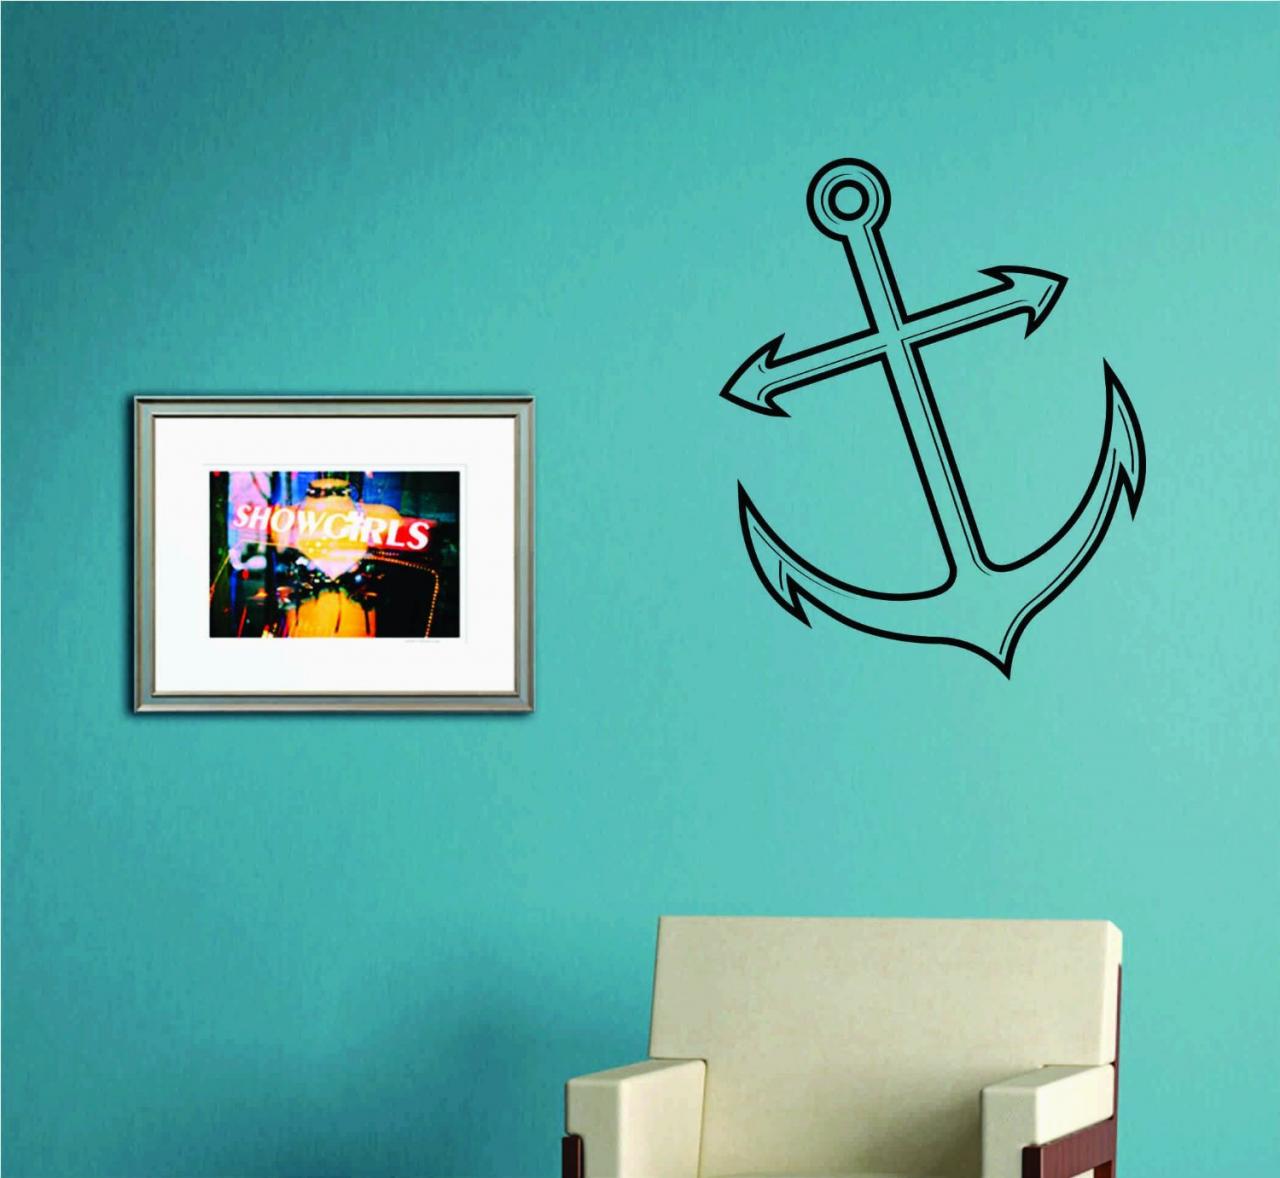 Anchor Version 104 Wall Decal Sticker Family Art Graphic Home Decor Mural Decal Sticker Famous Quotes Wall Mural